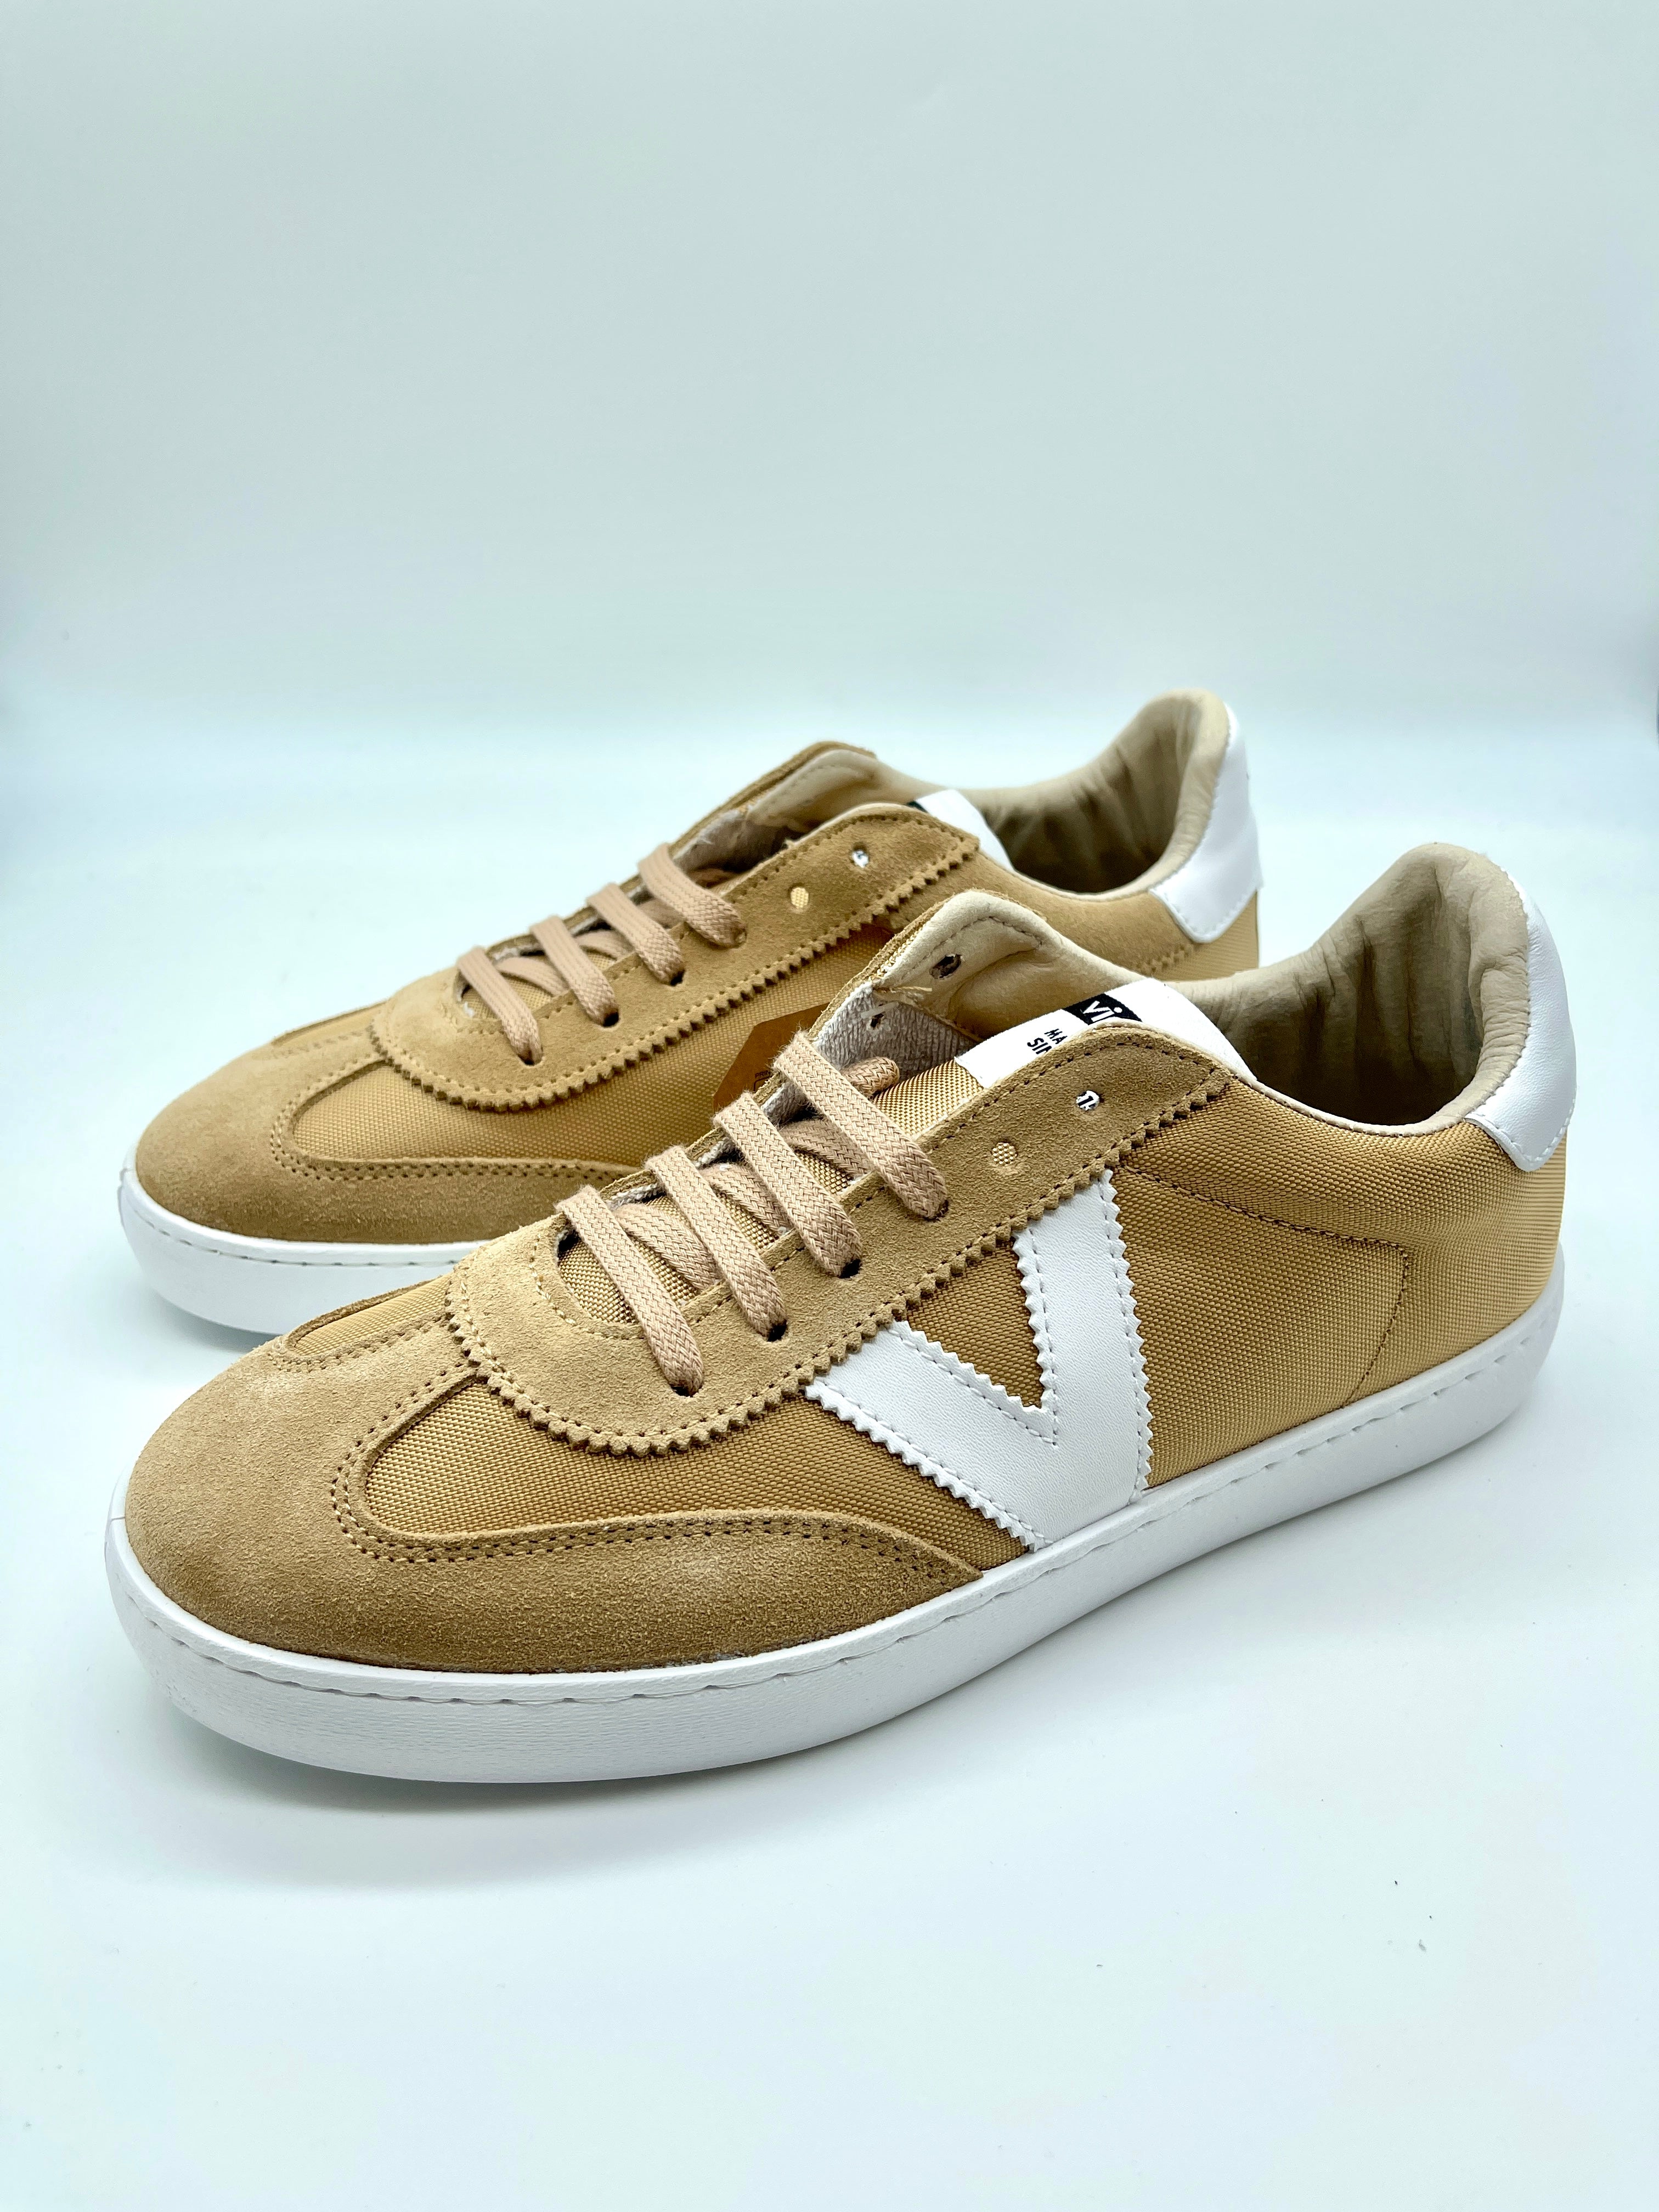 Victoria Berlin Leather and Nylon Sneakers in Taupe-312 Shoes-Little Bird Boutique